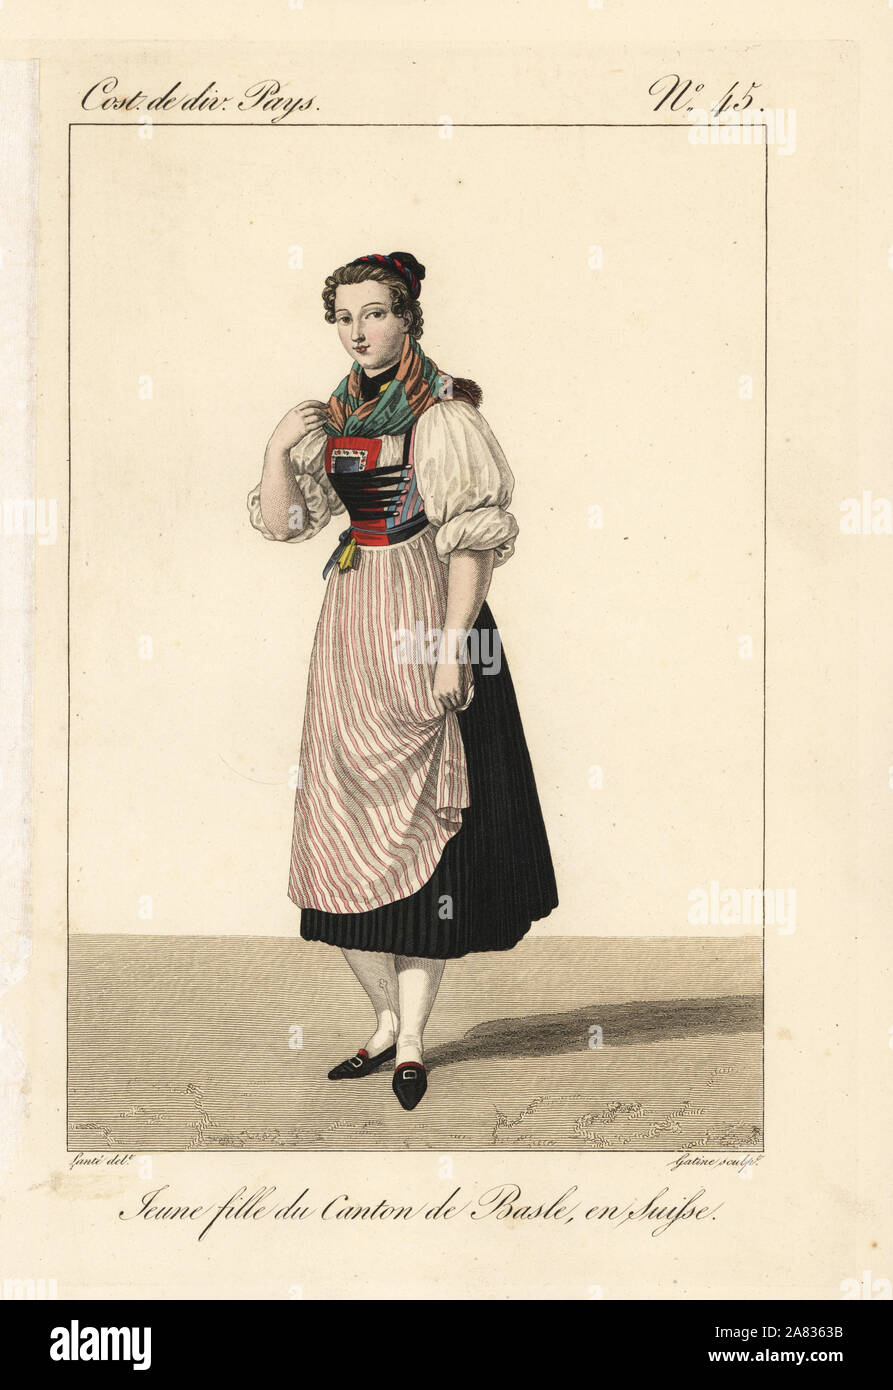 Young girl of the Canton of Basel, Switzerland, 19th century. She wears a silk tricolor cap, fichu, laced bodice, embroidered bib, apron, and petticoats. Handcoloured copperplate engraving by Georges Jacques Gatine after an illustration by Louis Marie Lante from Costumes of Various Countries, Costumes de Divers Pays, Paris, 1827. Stock Photo